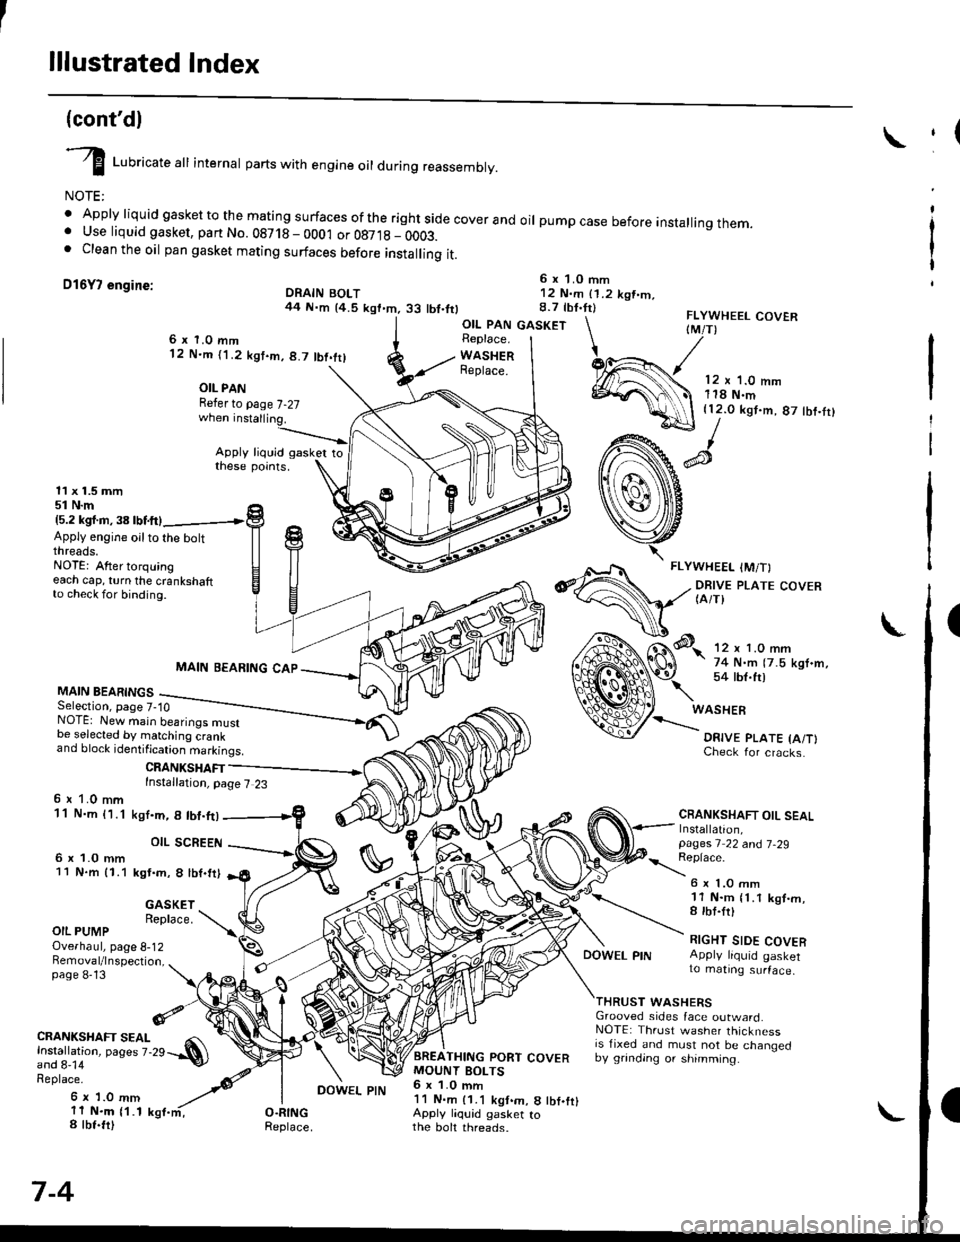 HONDA CIVIC 1997 6.G Workshop Manual lllustrated Index
(contdl
I Luoricate att internal parts with engine oil during reassembly.
NOTE:
 Apply liquid gasket to the mating surfaces ofthe rightside coverand oil pumpcase before installingt